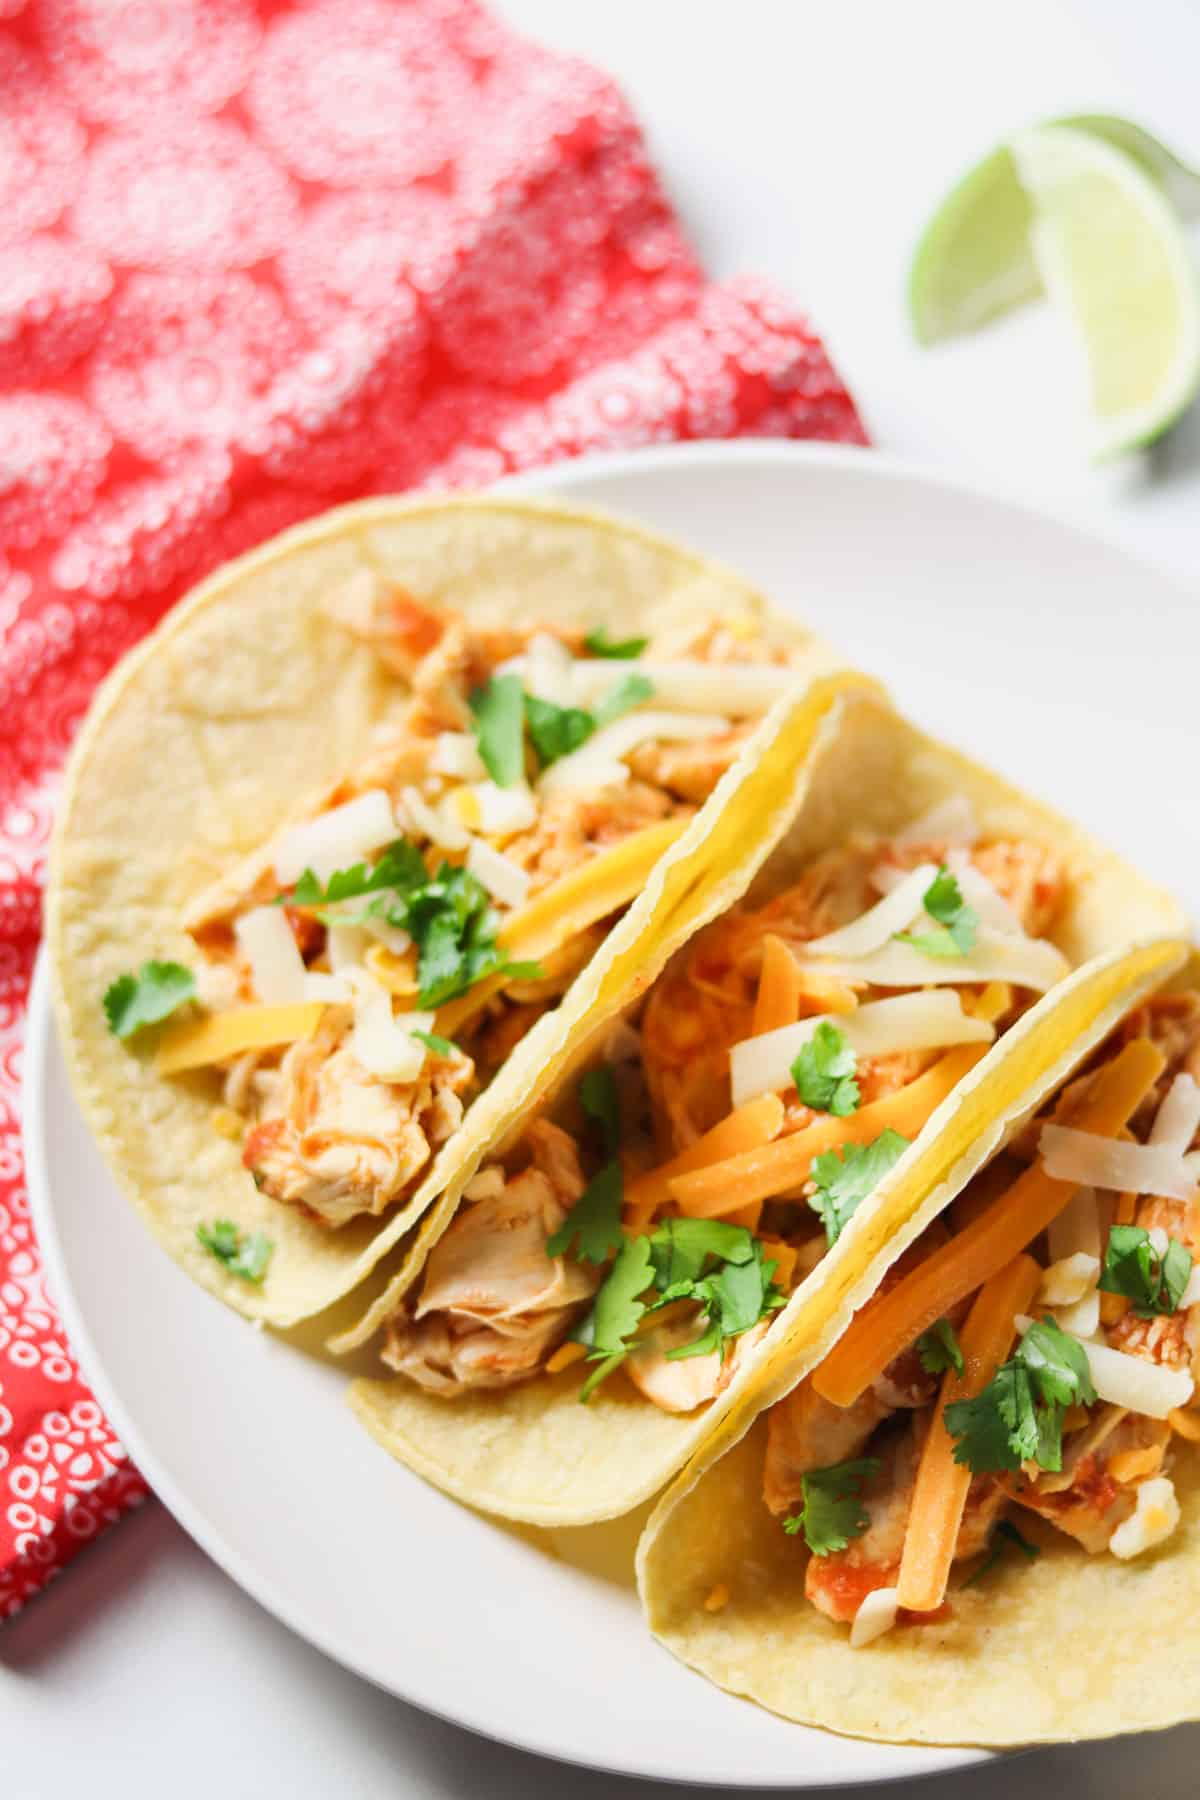 instant pot shredded chicken tacos on white plate with red pattern napkin and limes